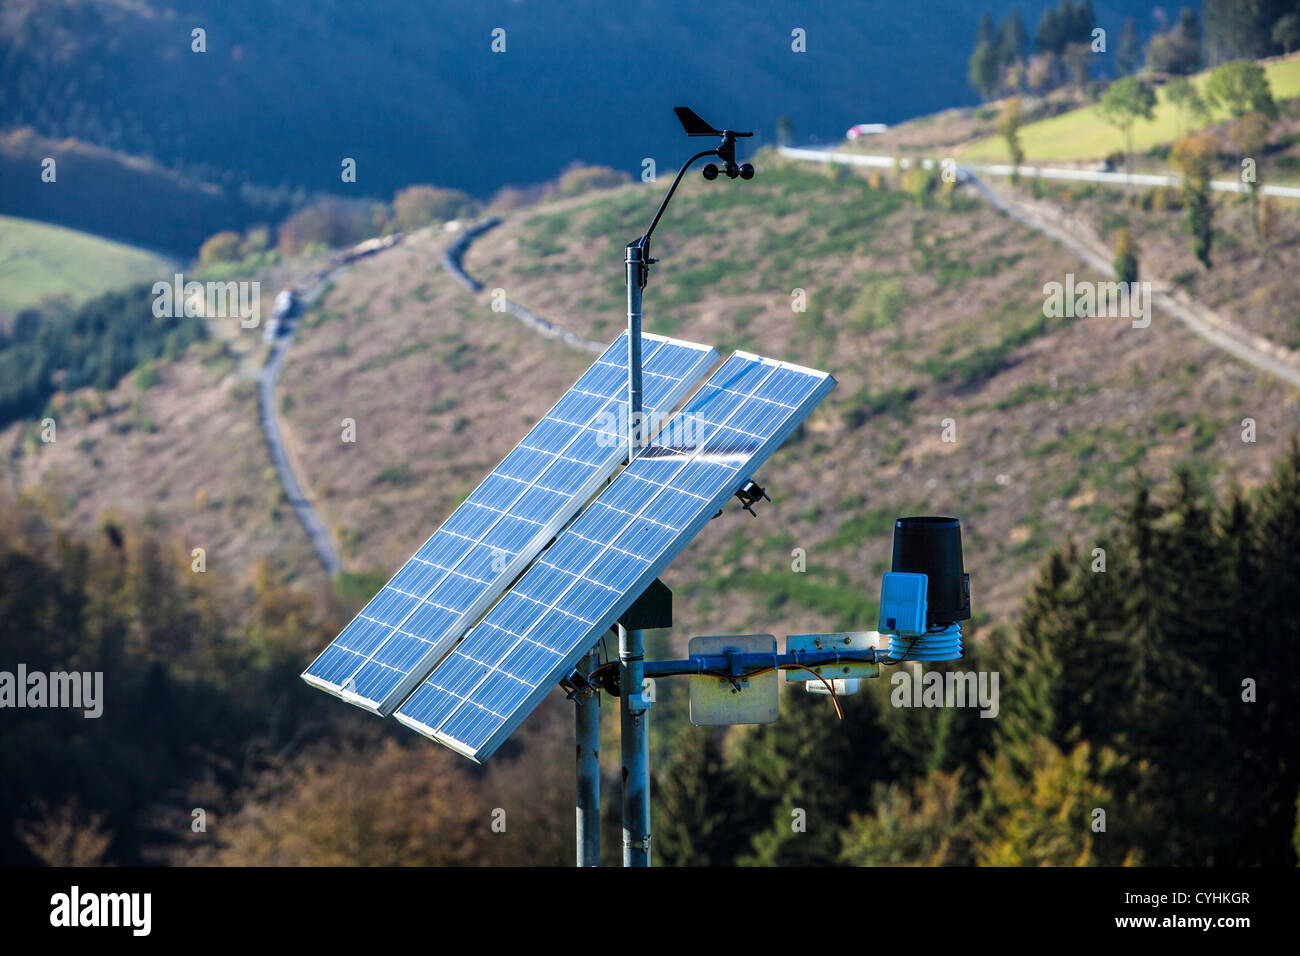 https://c8.alamy.com/comp/CYHKGR/portable-weather-station-powered-by-solar-energy-measures-all-kind-CYHKGR.jpg